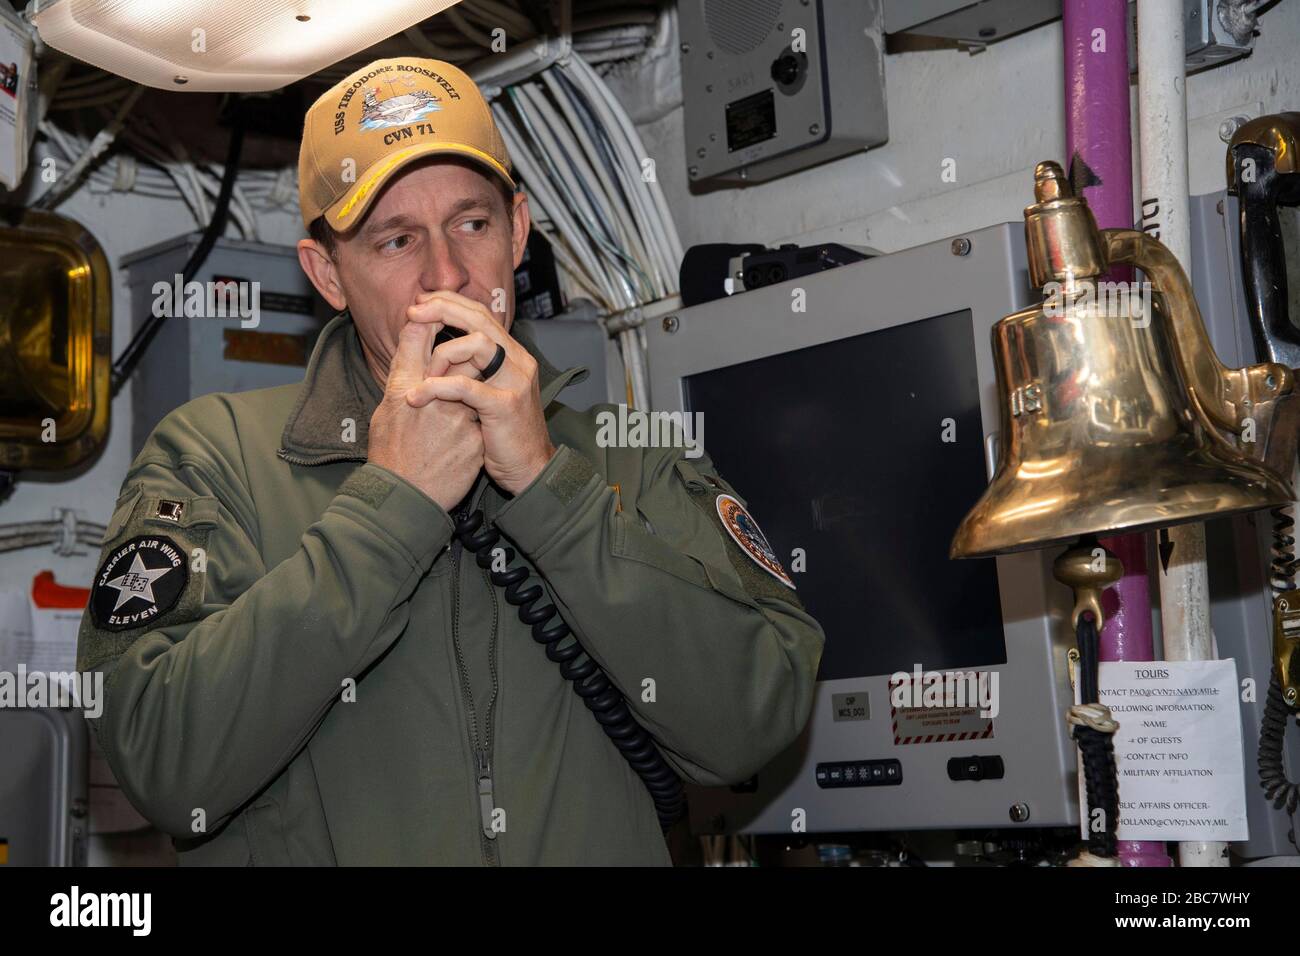 U.S. Navy Capt. Brett Crozier, commanding officer of the aircraft carrier USS Theodore Roosevelt, addresses the crew as they depart for deployment January 17, 2020 in San Diego, California. Crozier was relieved of duty March 31, 2020 after writing a four-page letter to his superiors, pleading with them to take action to help stem the spread of COVID-19 cases on his ship. Stock Photo